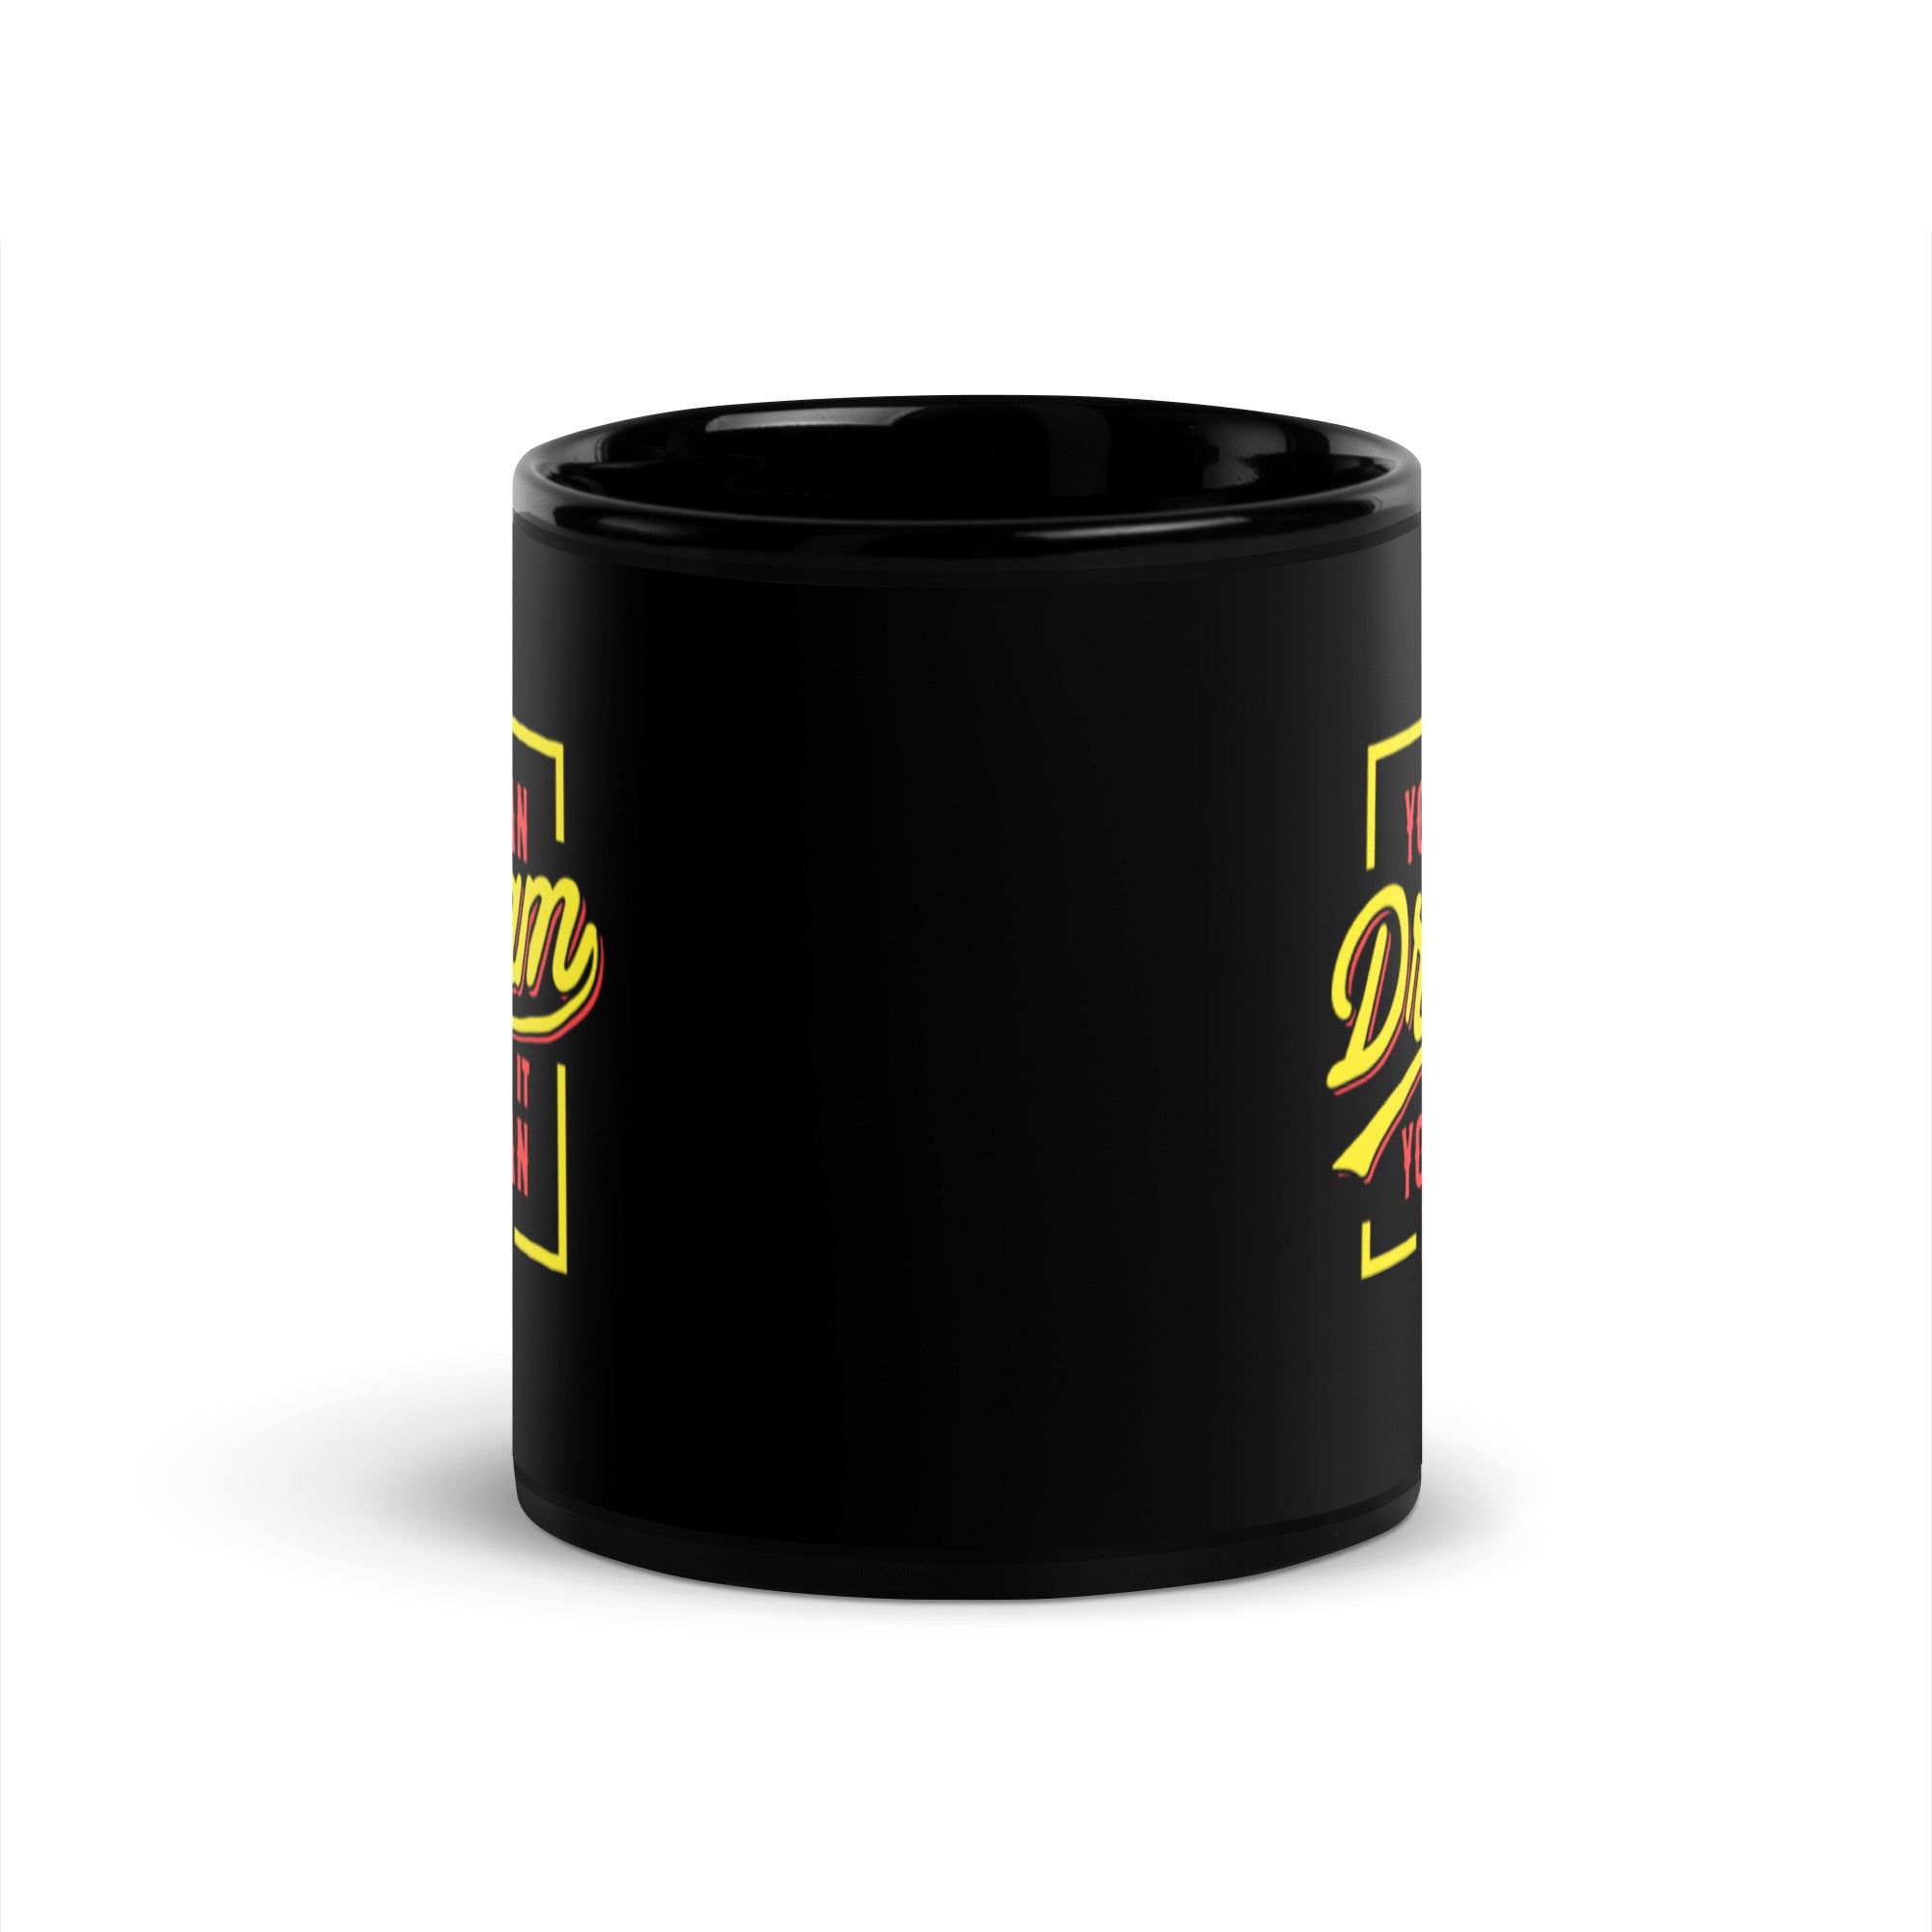 If You Can Dream It You Can Do It - Black Glossy Mug